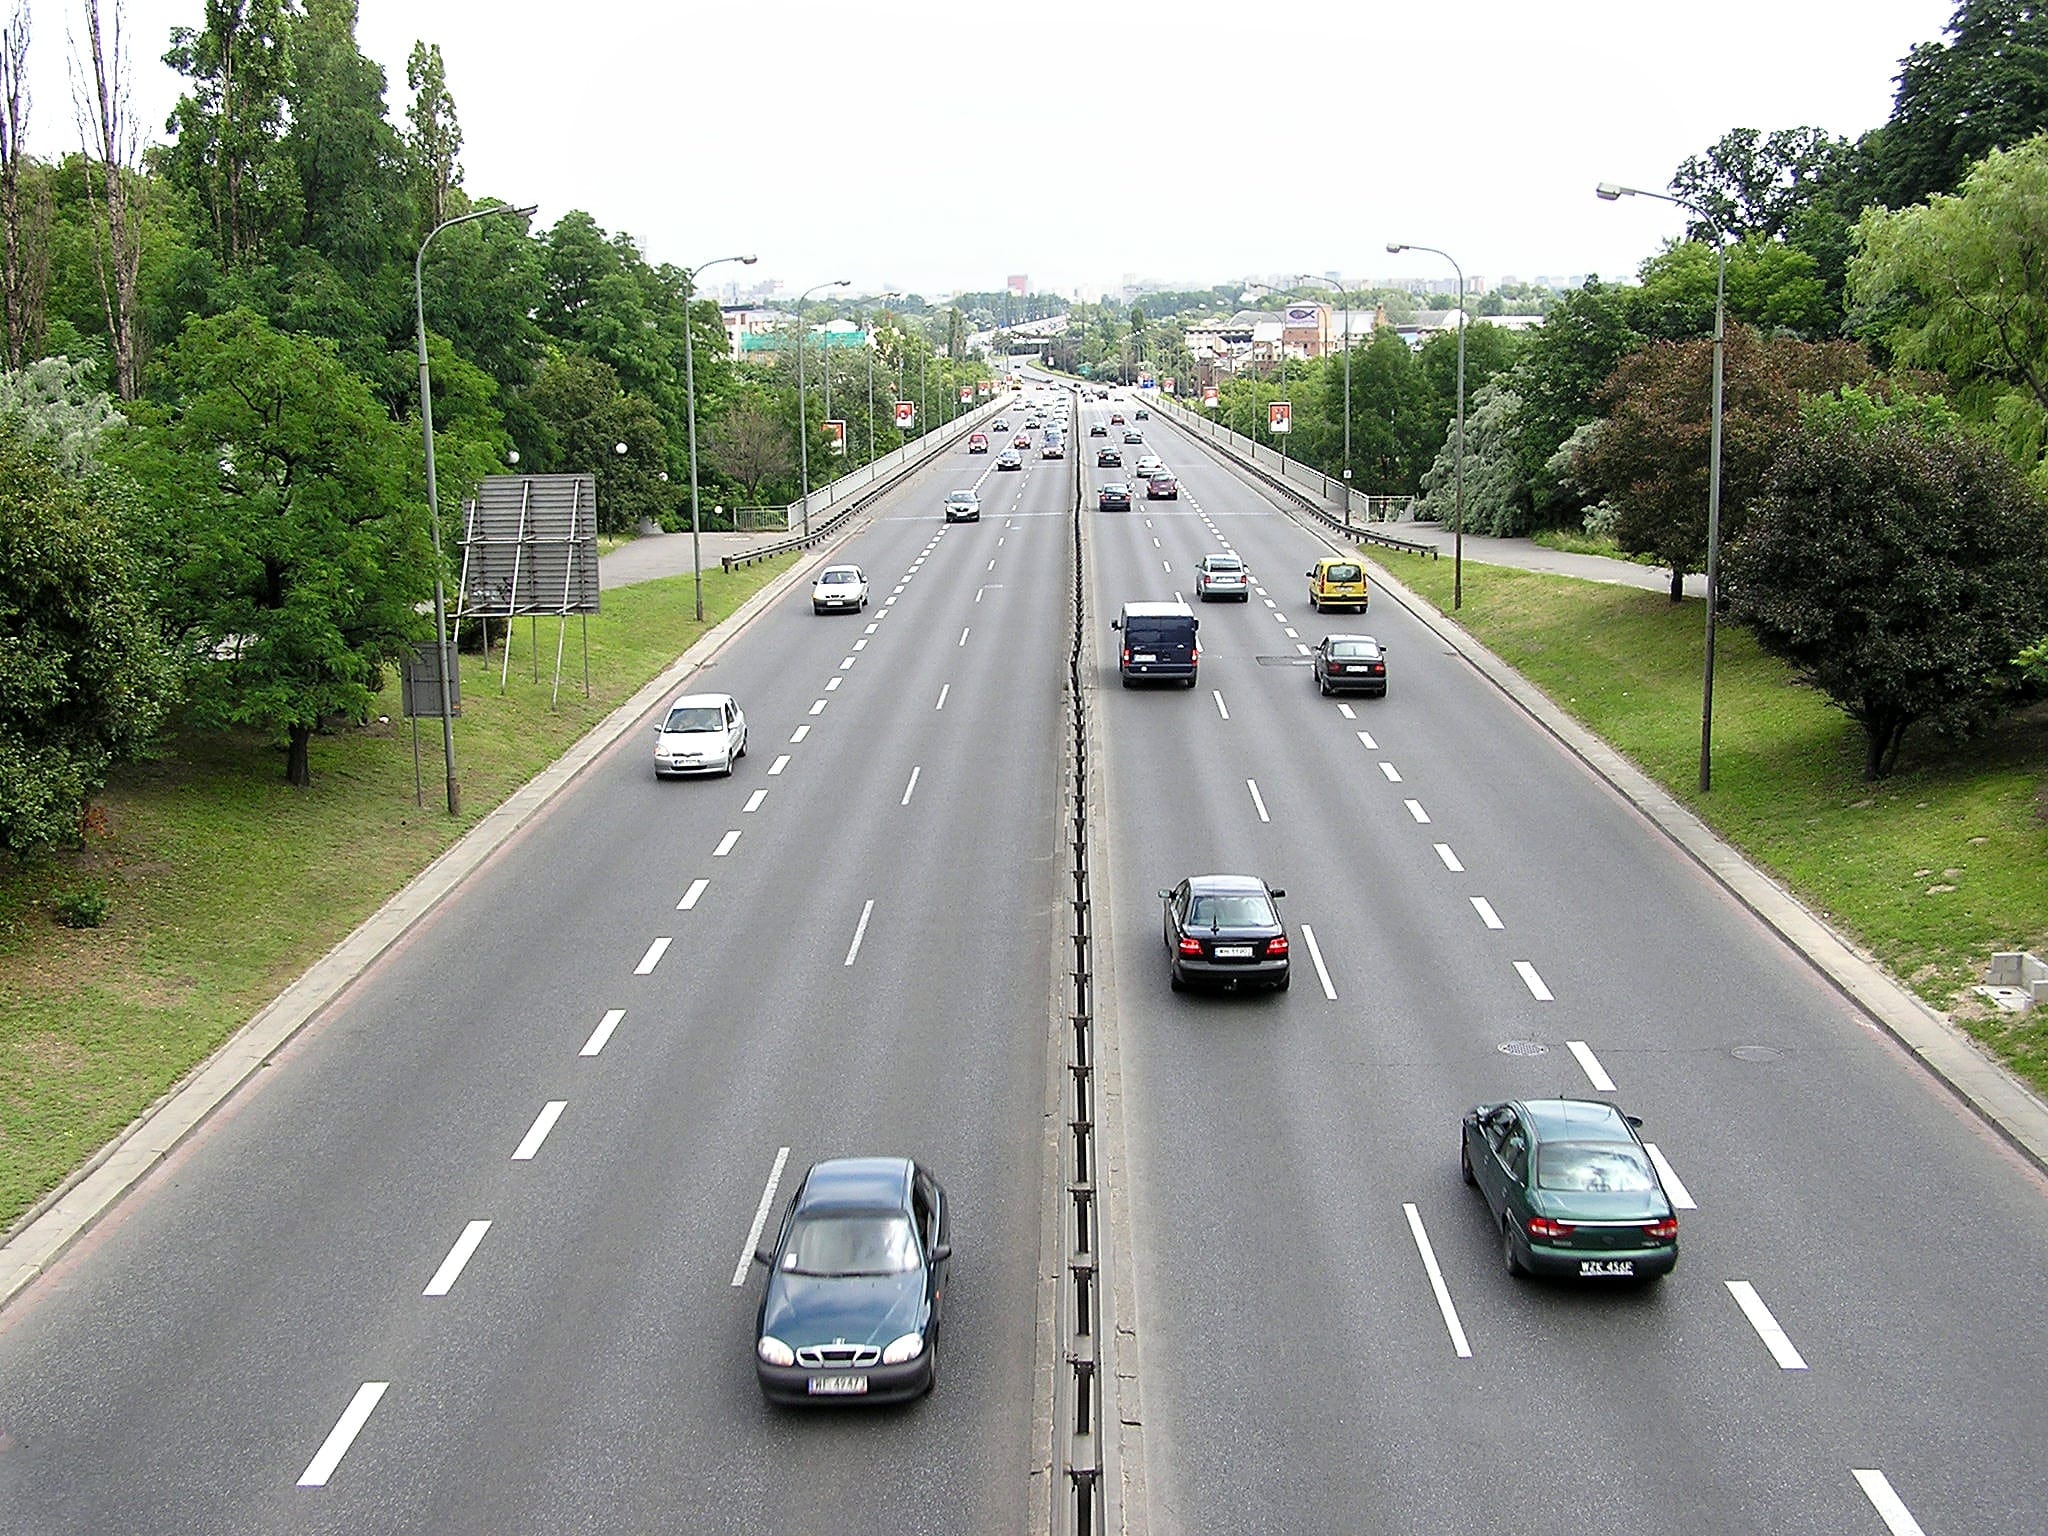 Cars on roadway